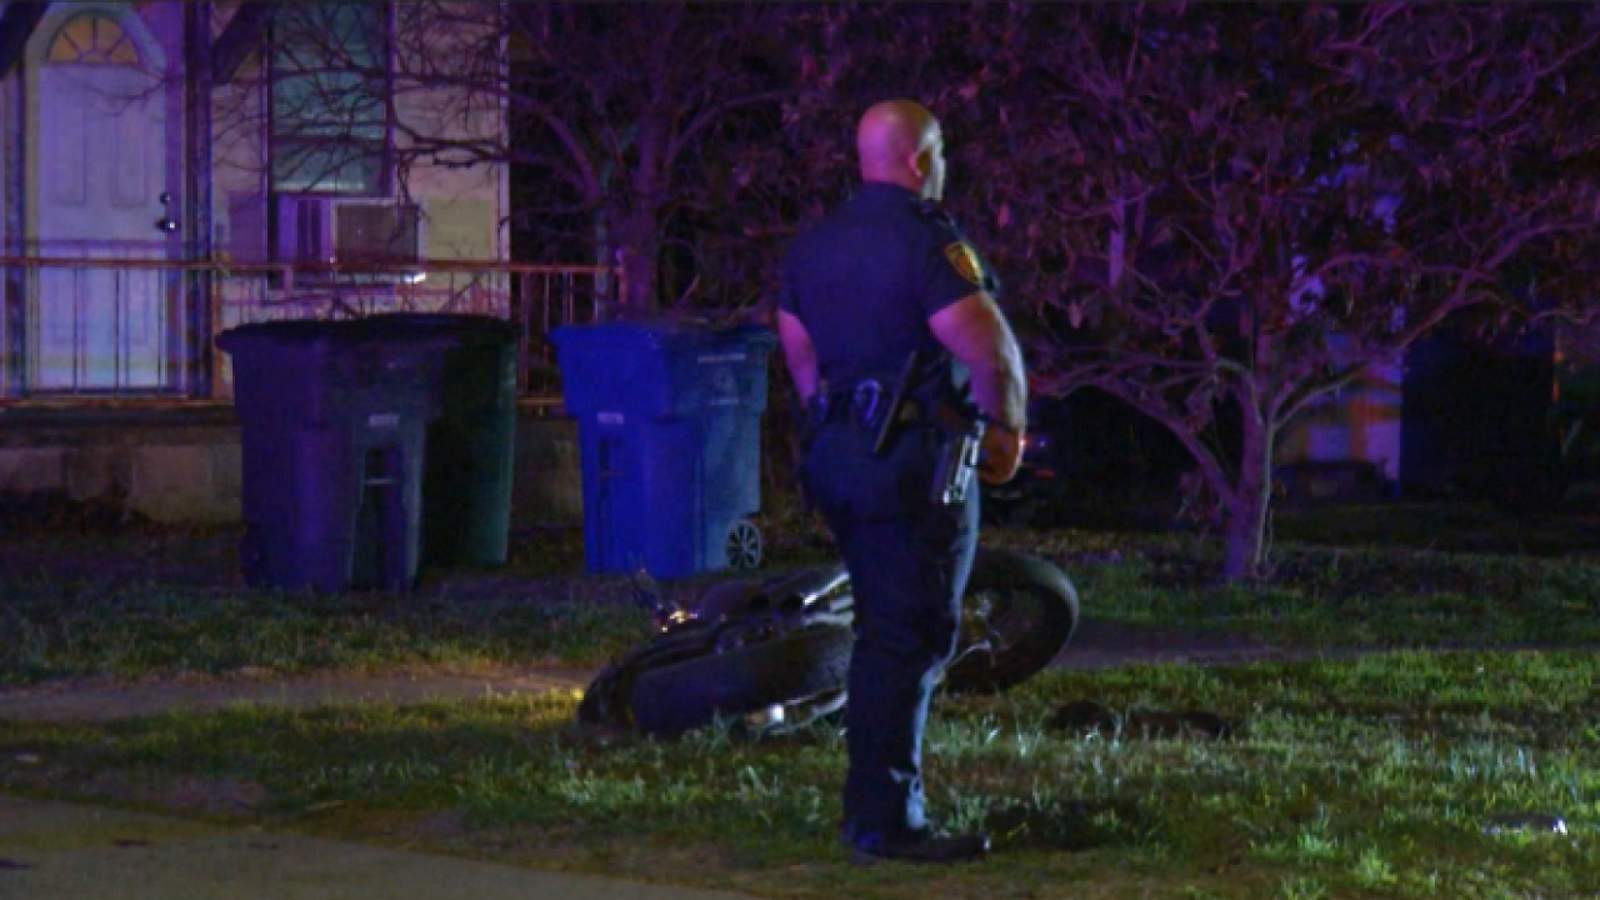 Motorcyclist returning home, pulling into driveway struck in hit-and-run crash, police say